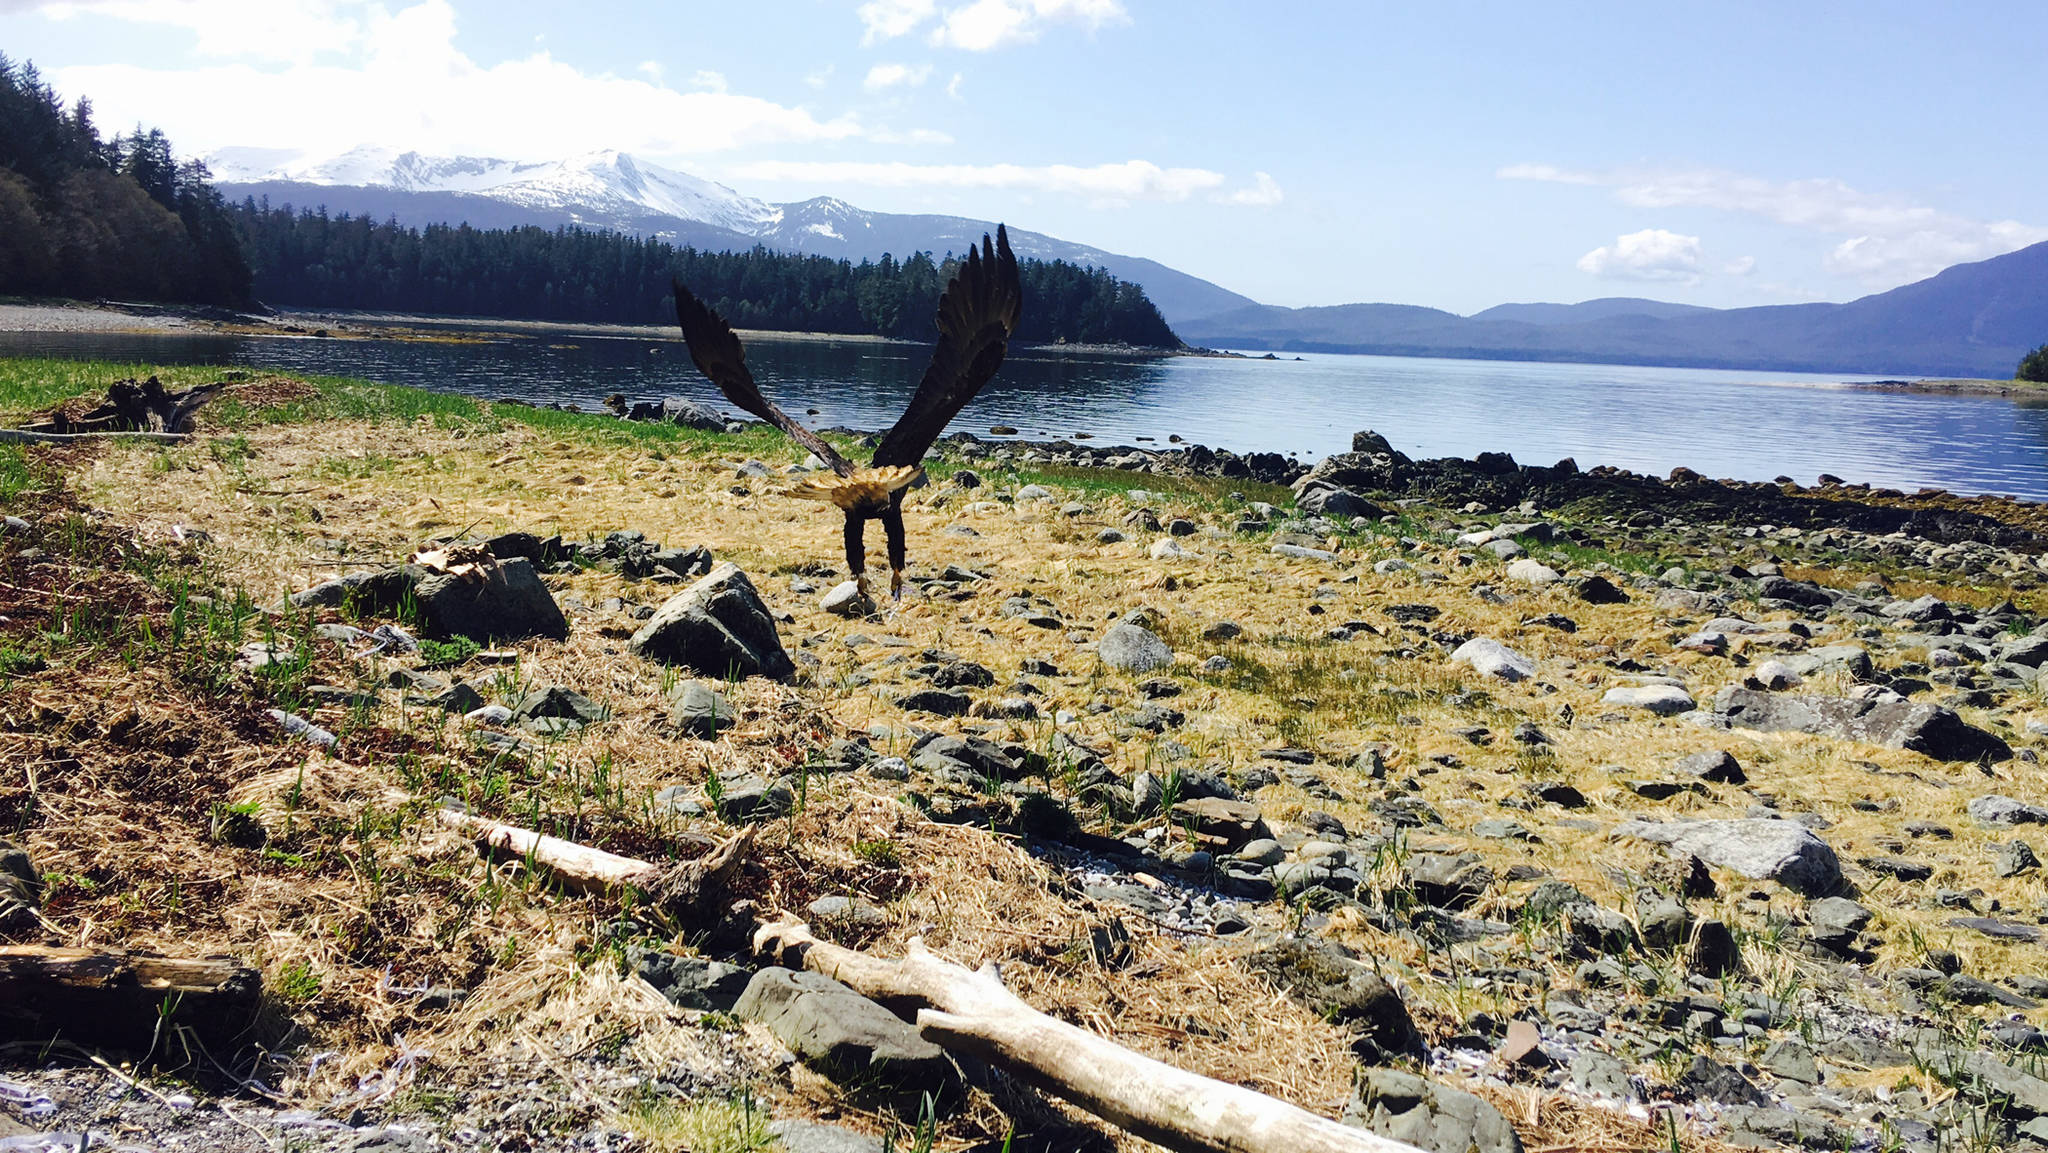 Liftoff! (Photo courtesy of the Juneau Raptor Center)